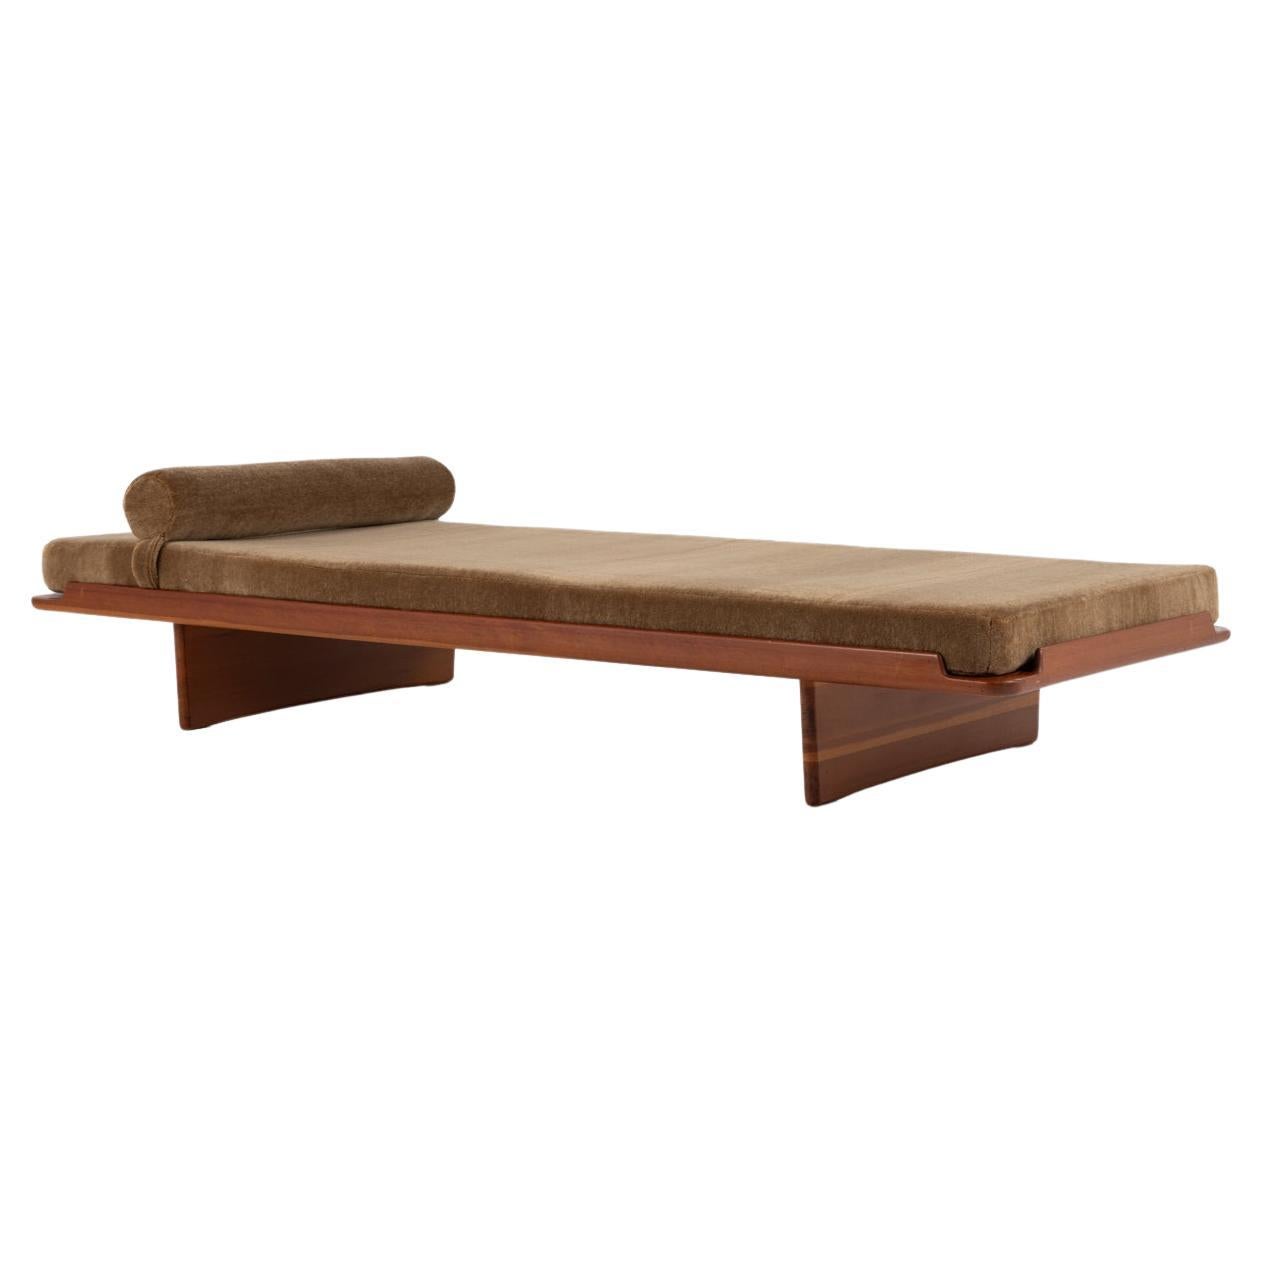 GJ Daybed in Oregon pine by Grete Jalk